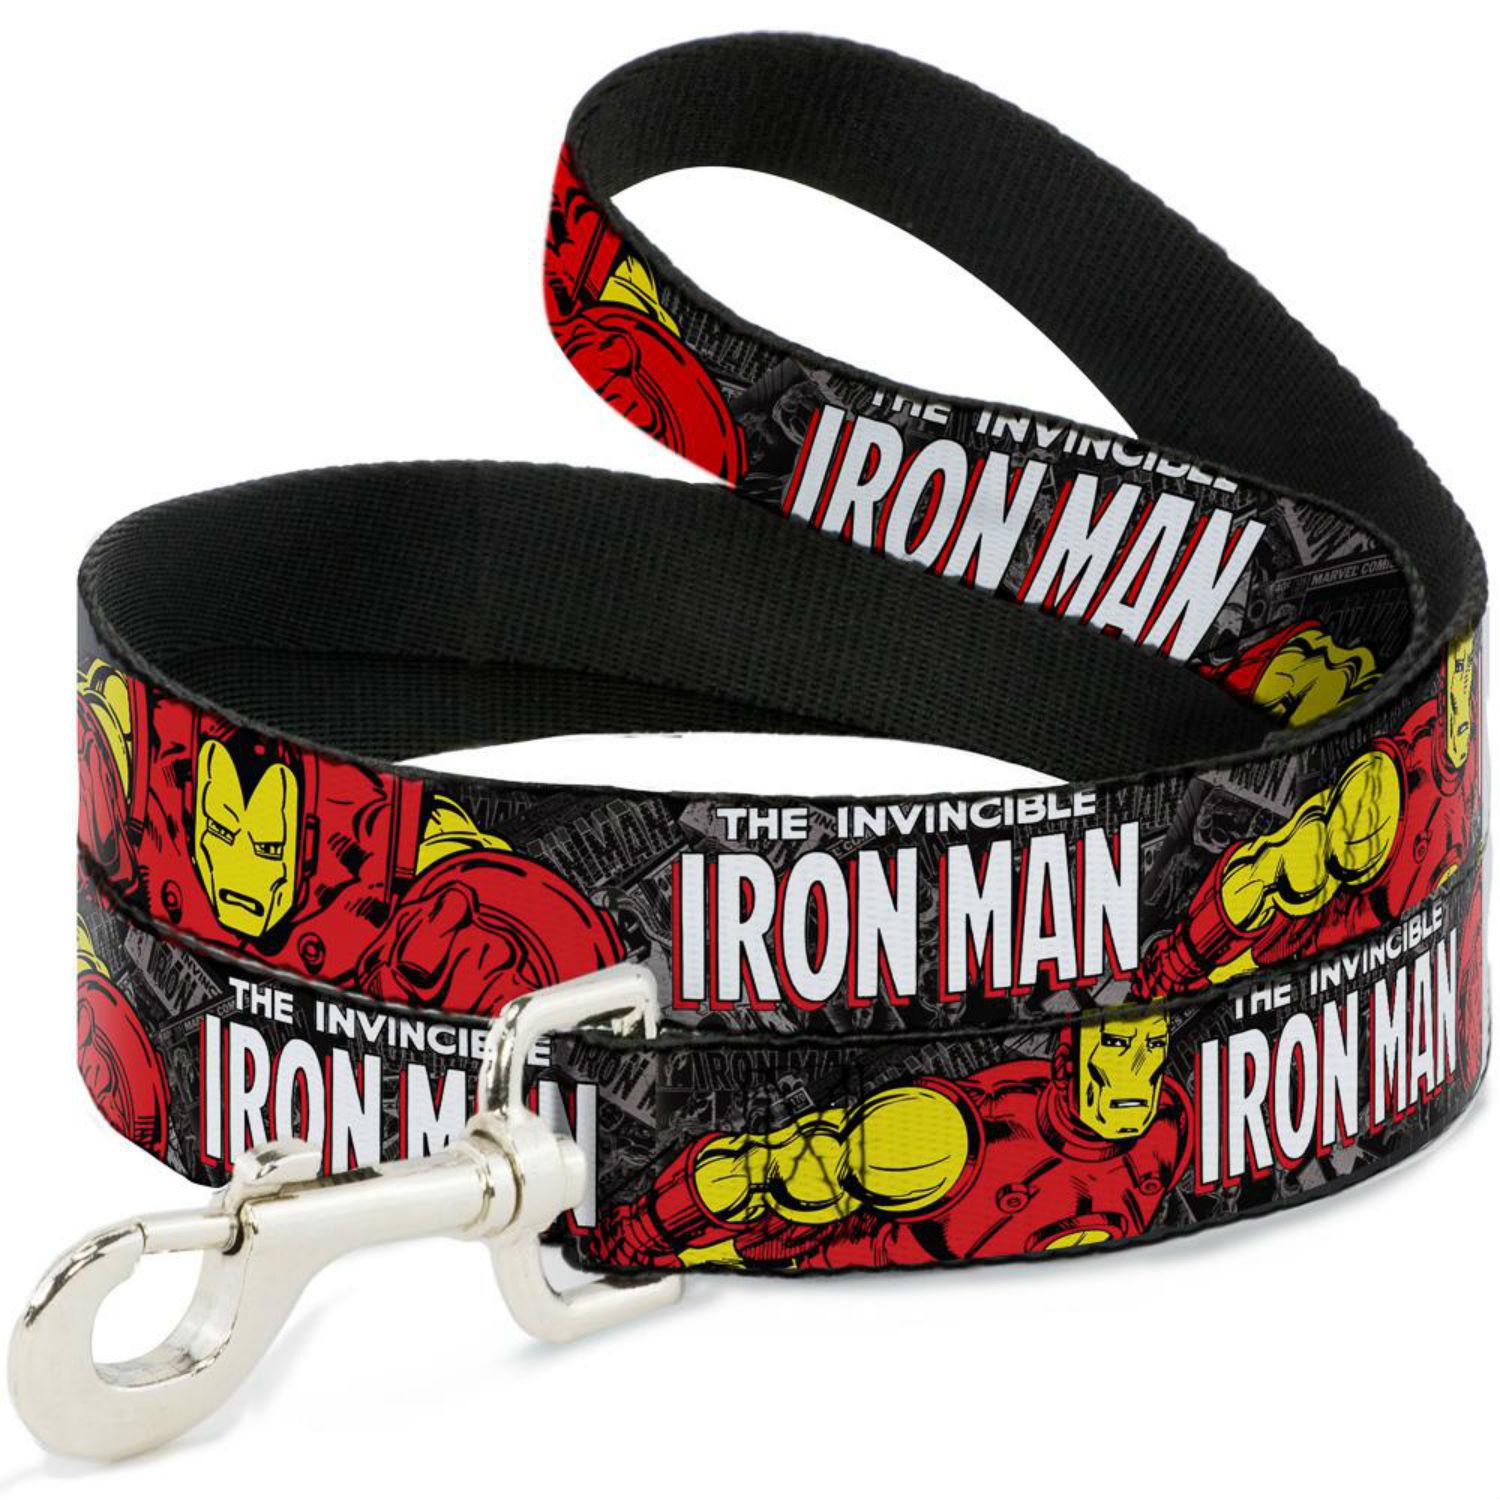 The Invincible Iron Man Dog Leash by Buckle-Down